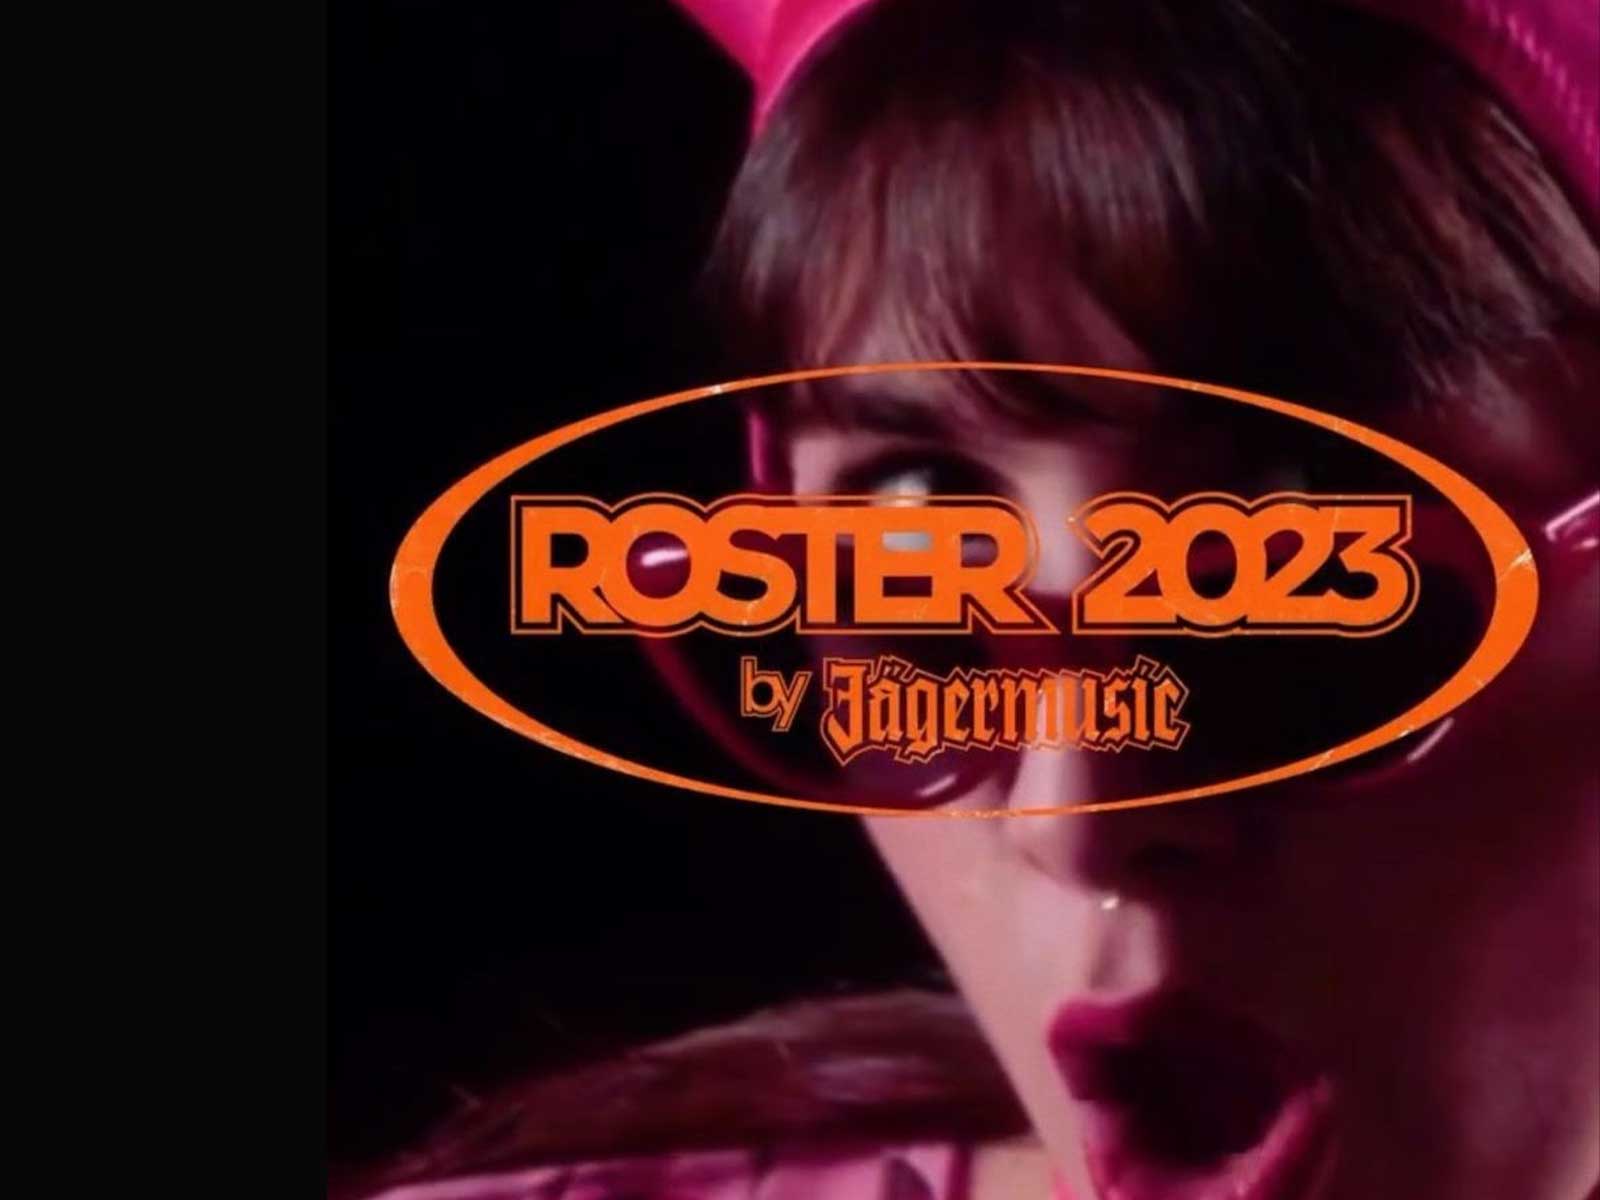 This is Jägermusic’s roster for 2023